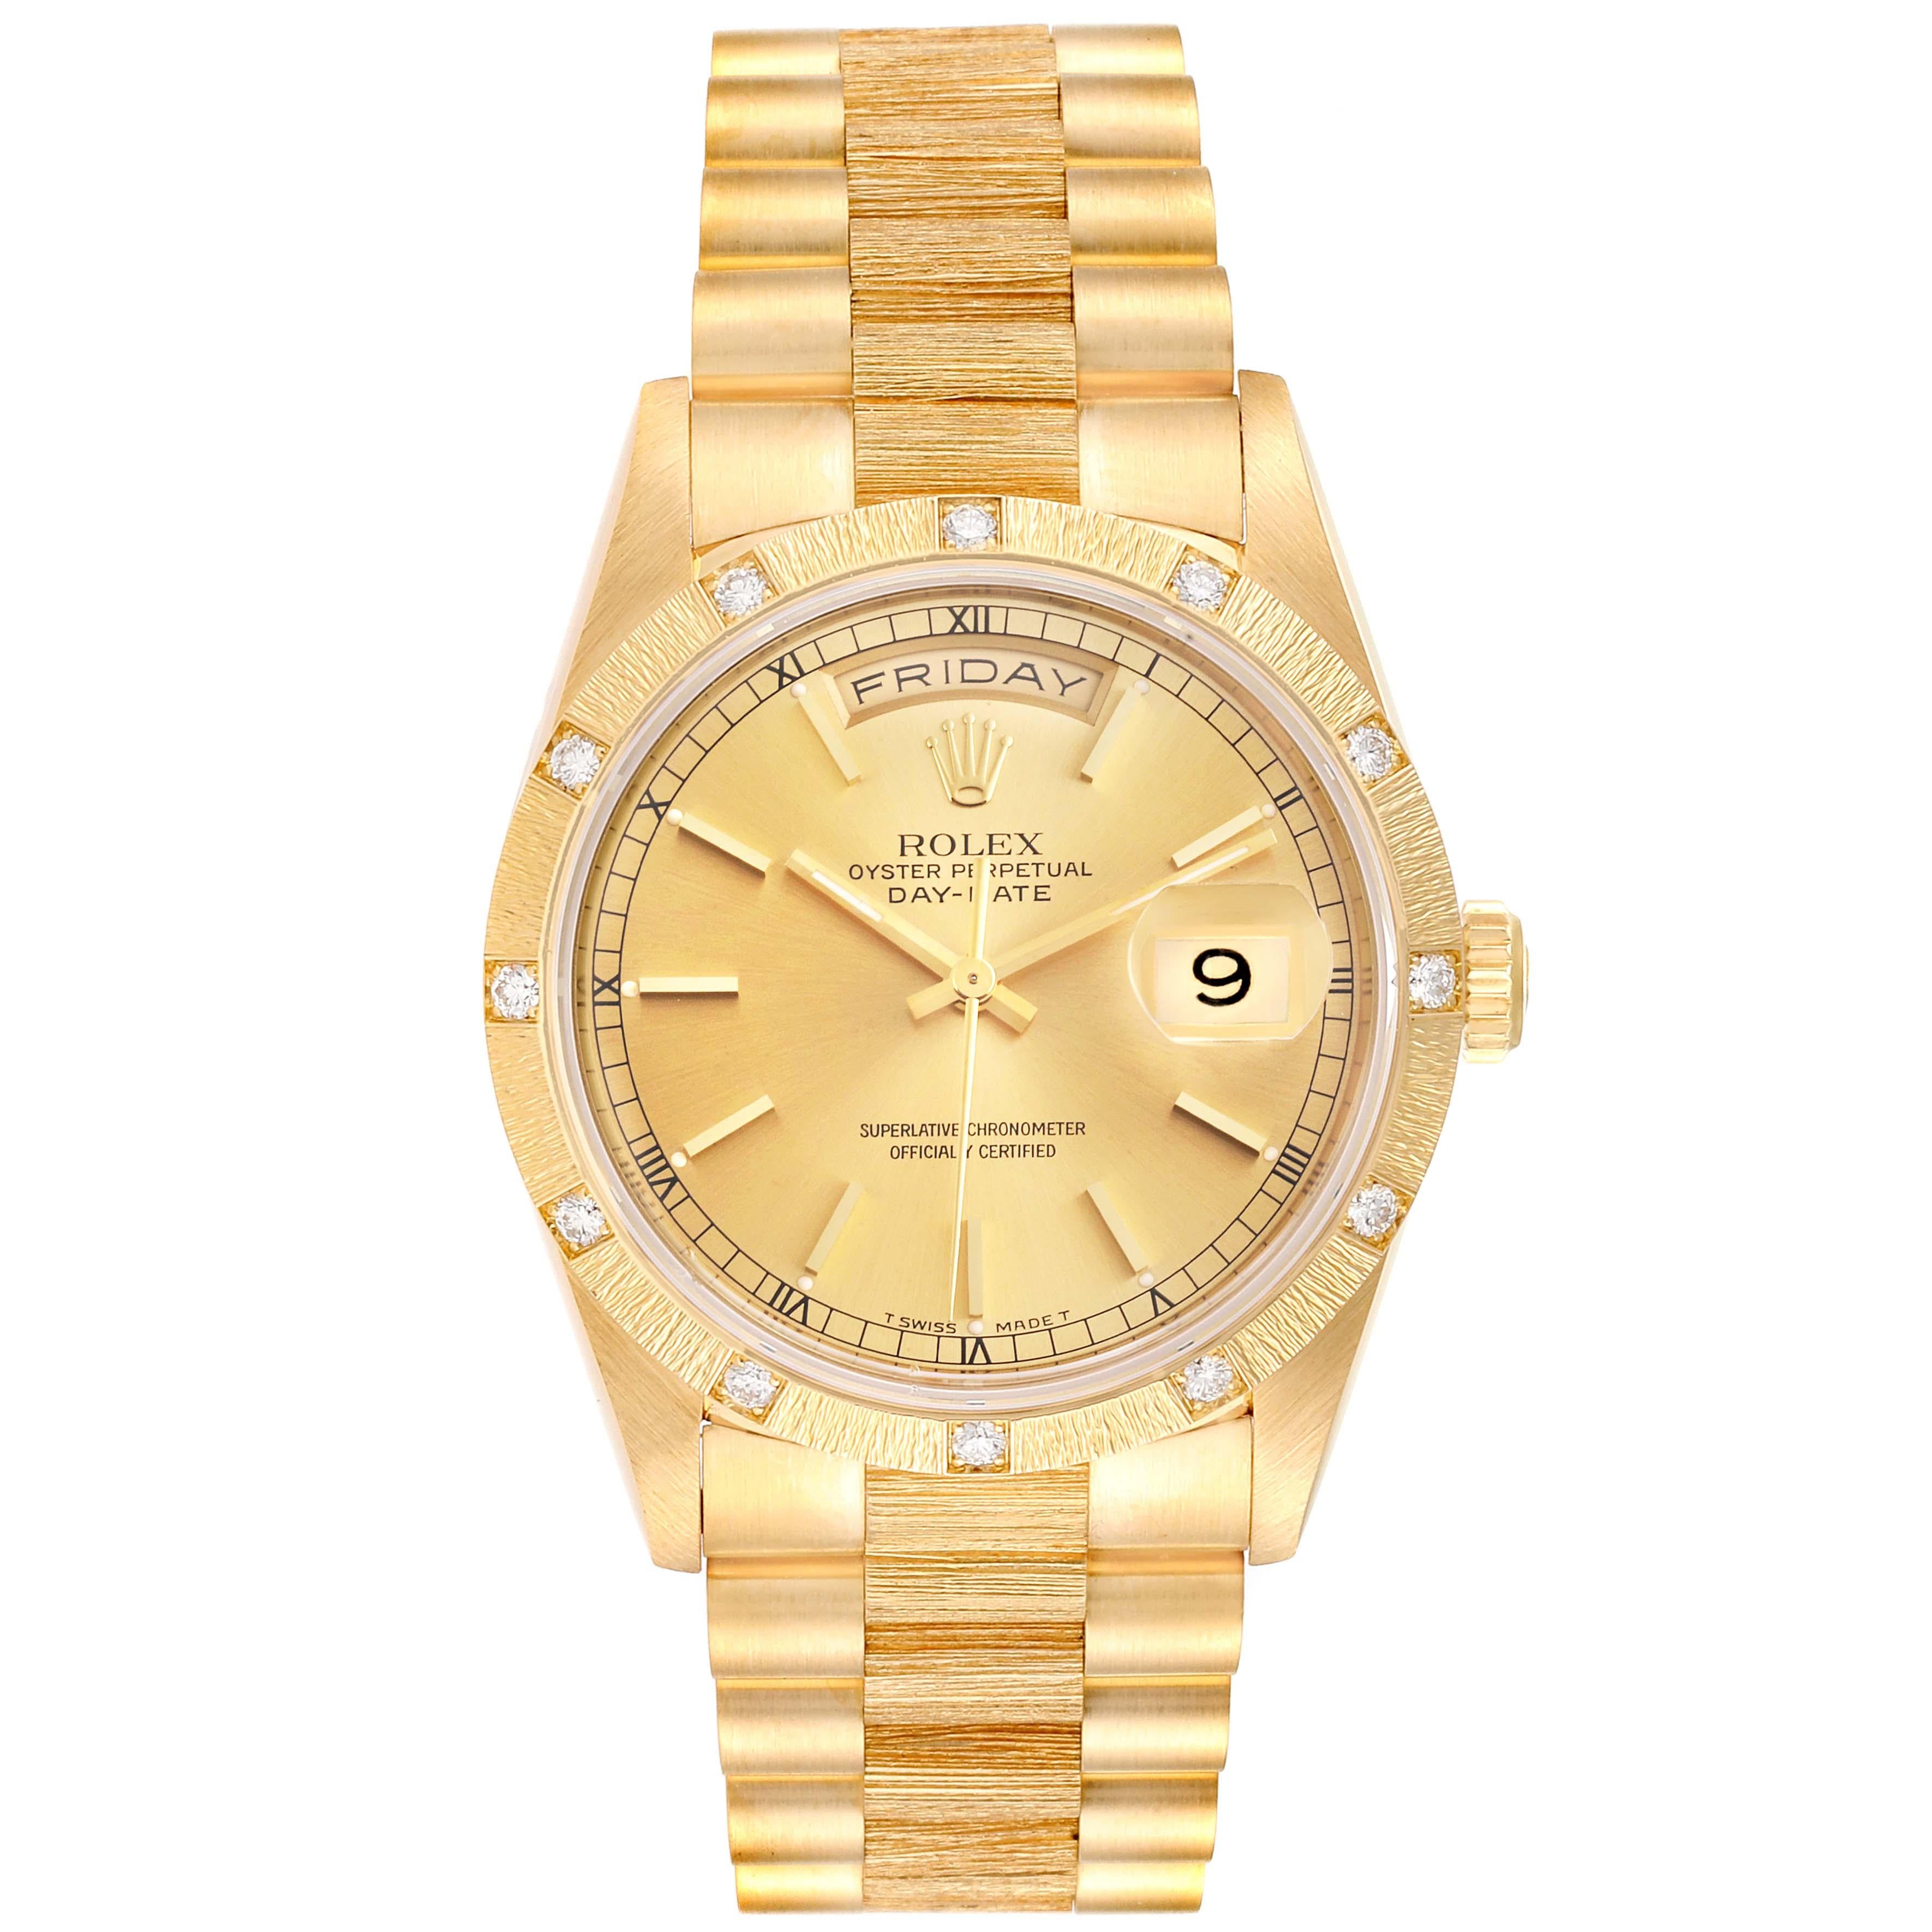 Rolex President Day-Date 18K Yellow Gold Diamond Mens Watch 18308. Officially certified chronometer self-winding movement with quickset date function. 18k yellow gold oyster case 36.0 mm in diameter. Rolex logo on a crown. 18k yellow gold original